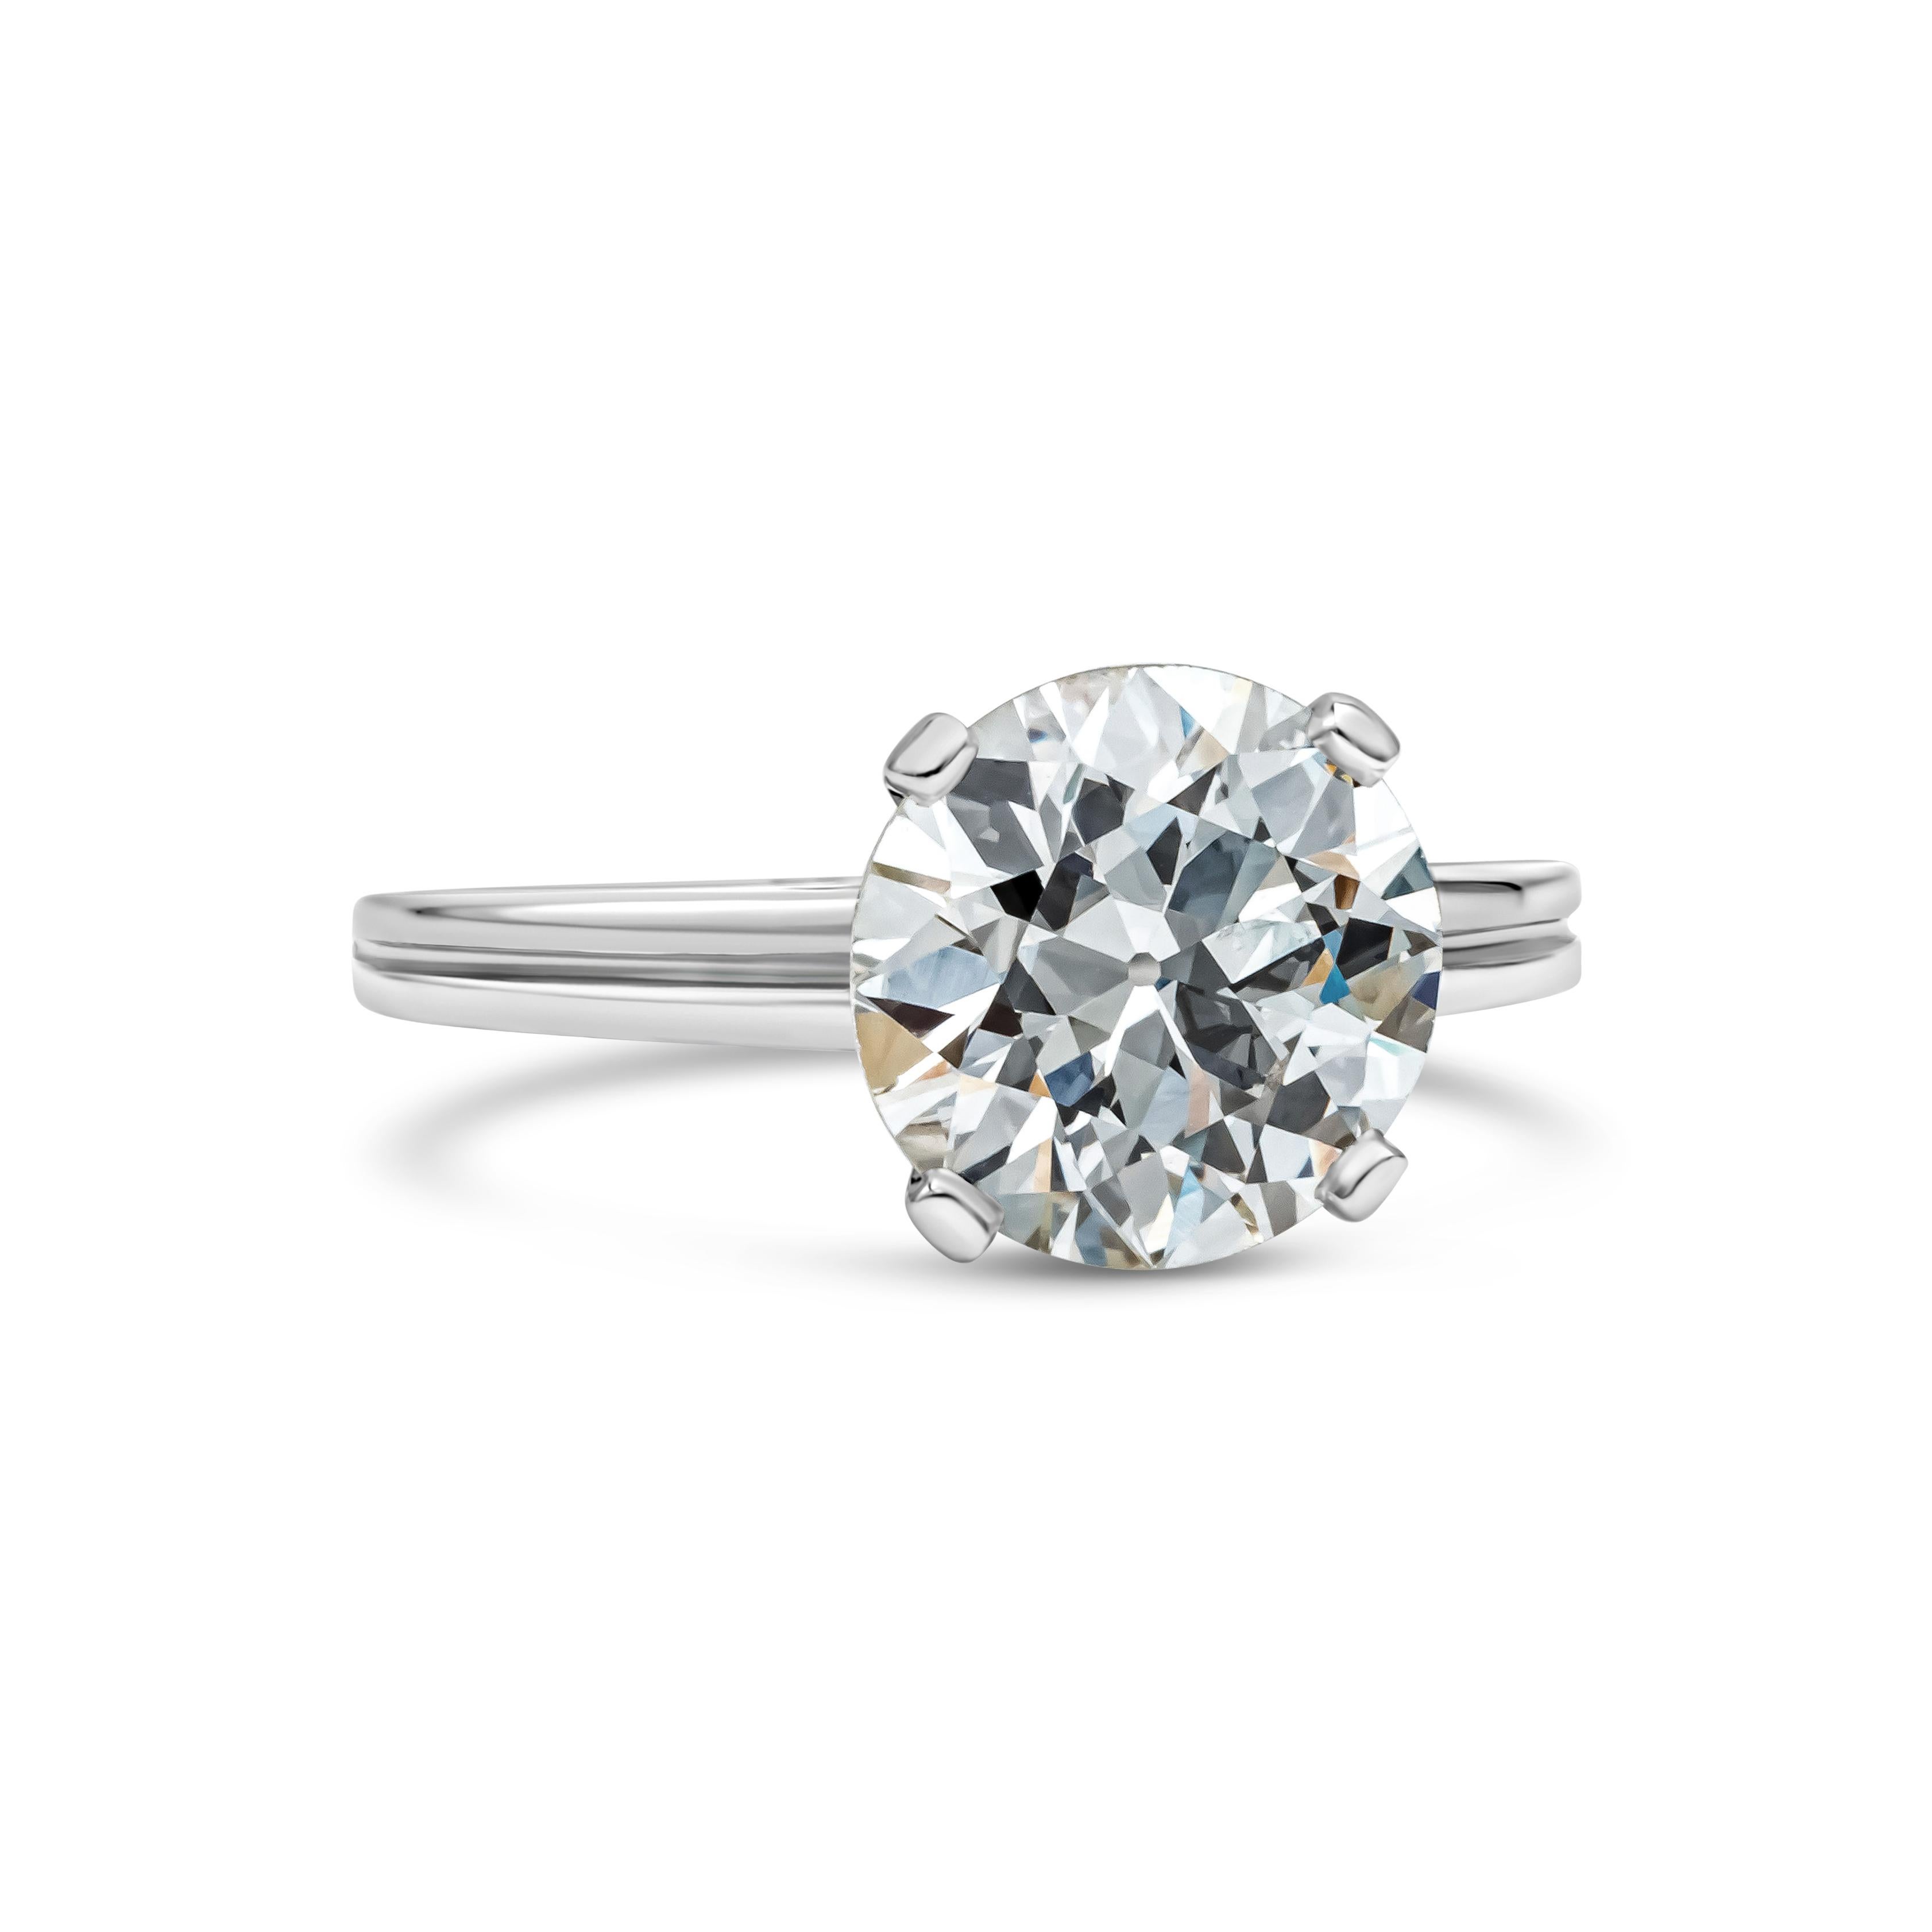 This solitaire engagement ring features a GIA Certified 2.47 carat round brilliant diamond, K Color and VS1 in Clarity. Set in a traditional 4 prong style setting. Made with Platinum.

Roman Malakov is a custom house, specializing in creating